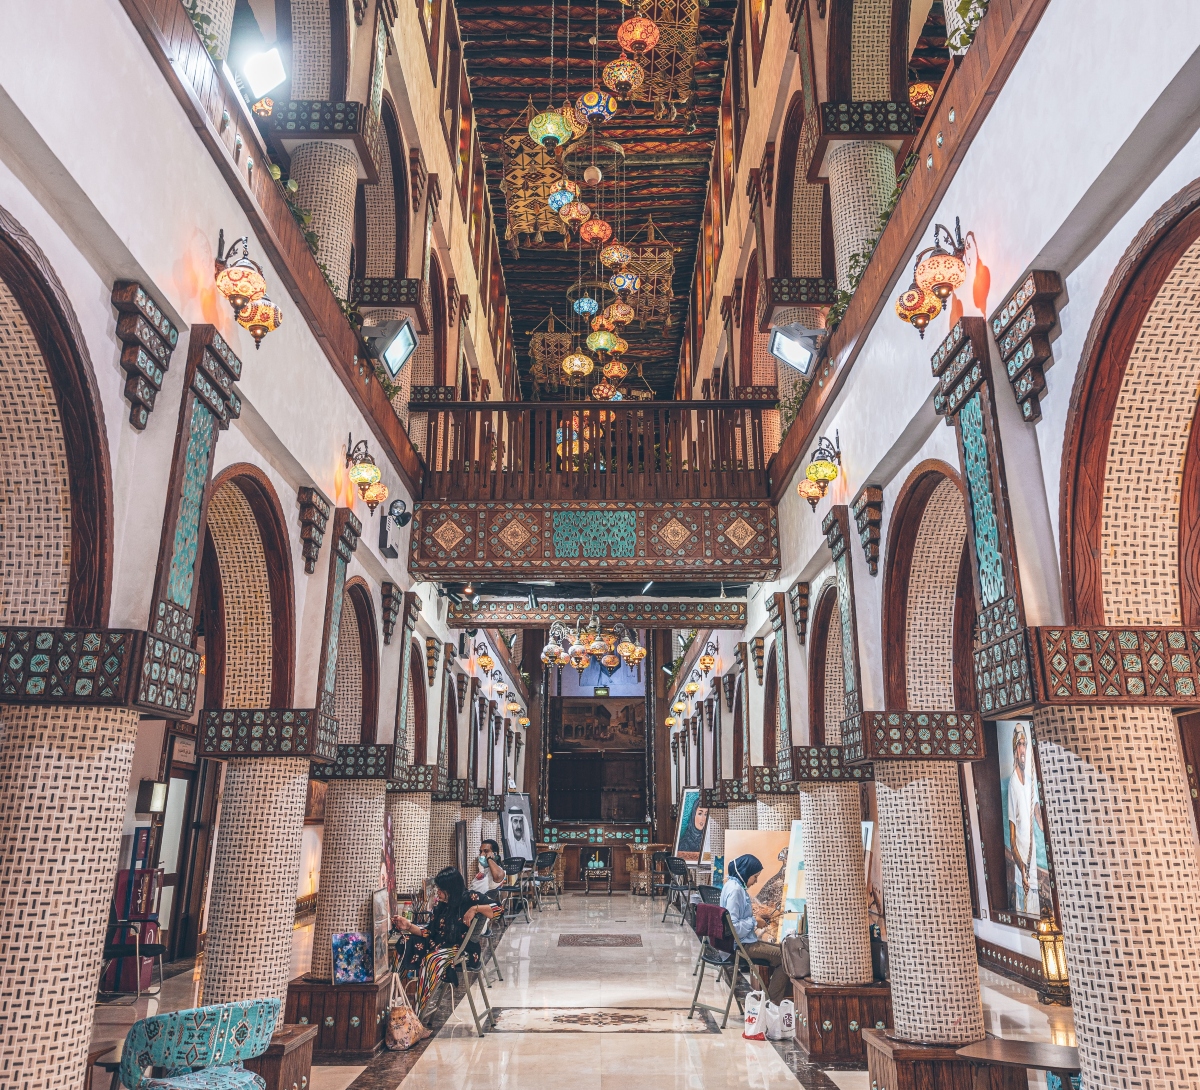 Tips For Shopping At Souq Waqif, The Historic Market In Doha